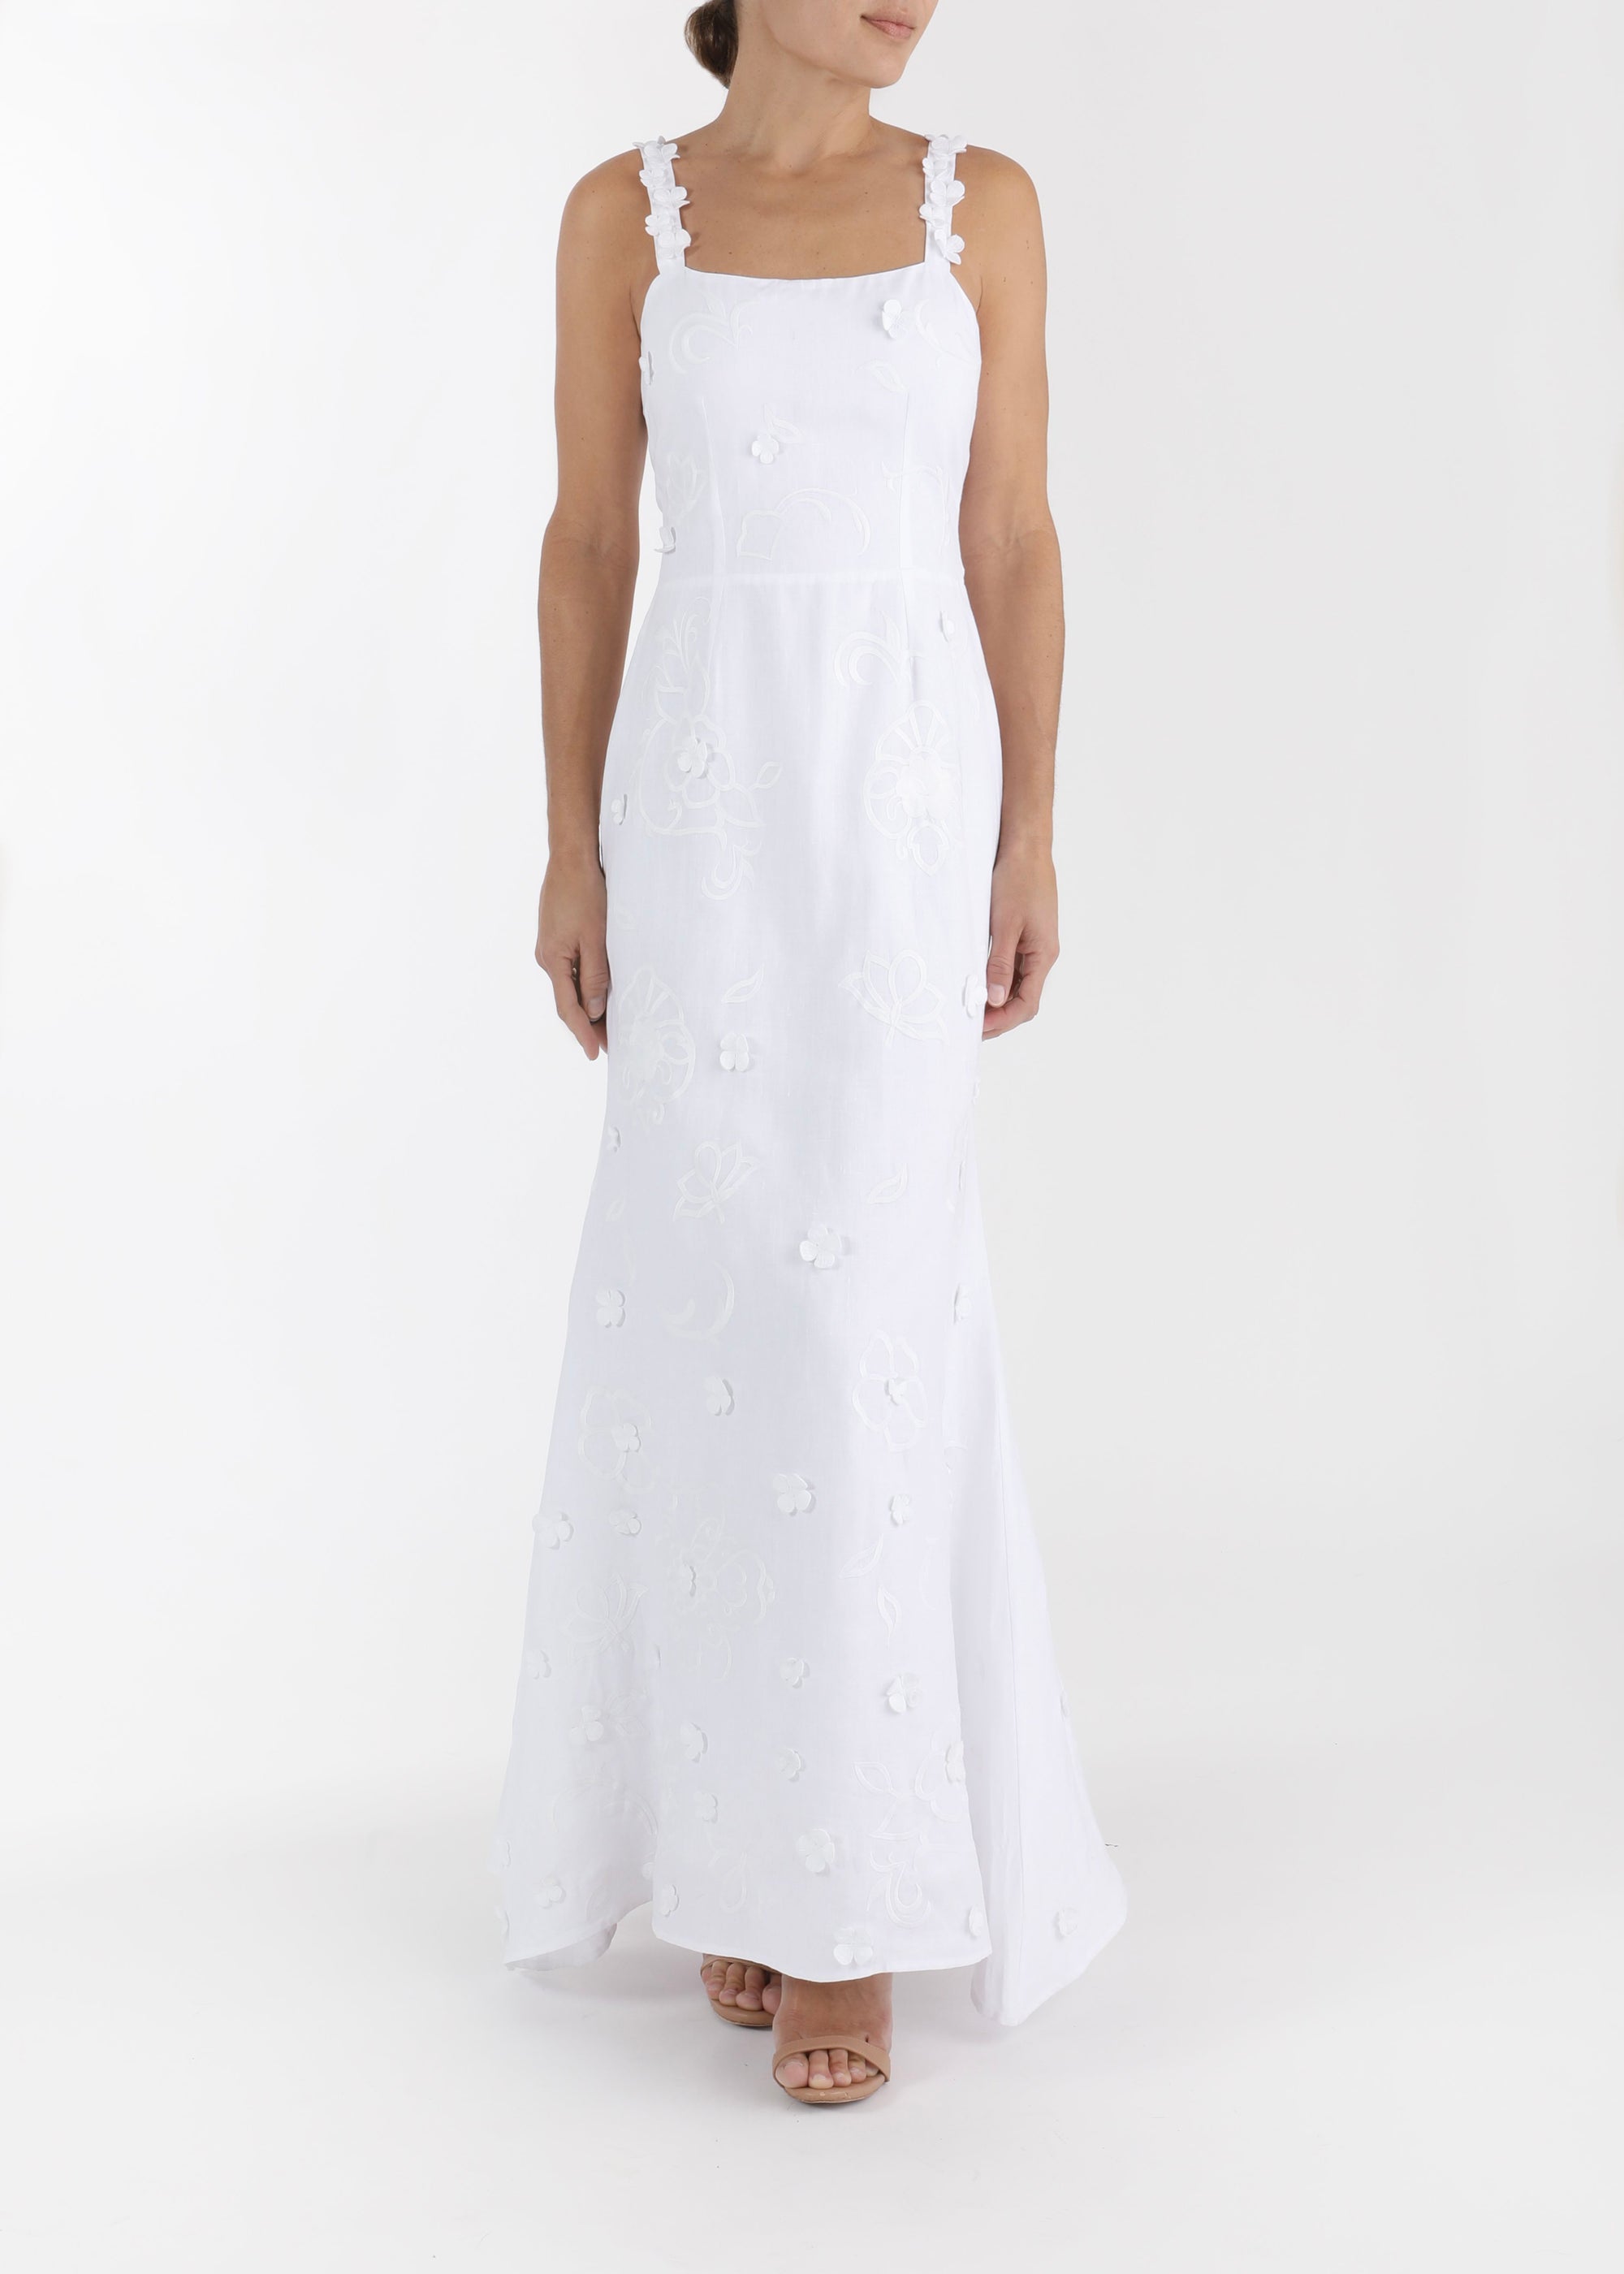 Fanm Mon and Over The Moon Alexandra Bridal Dress 